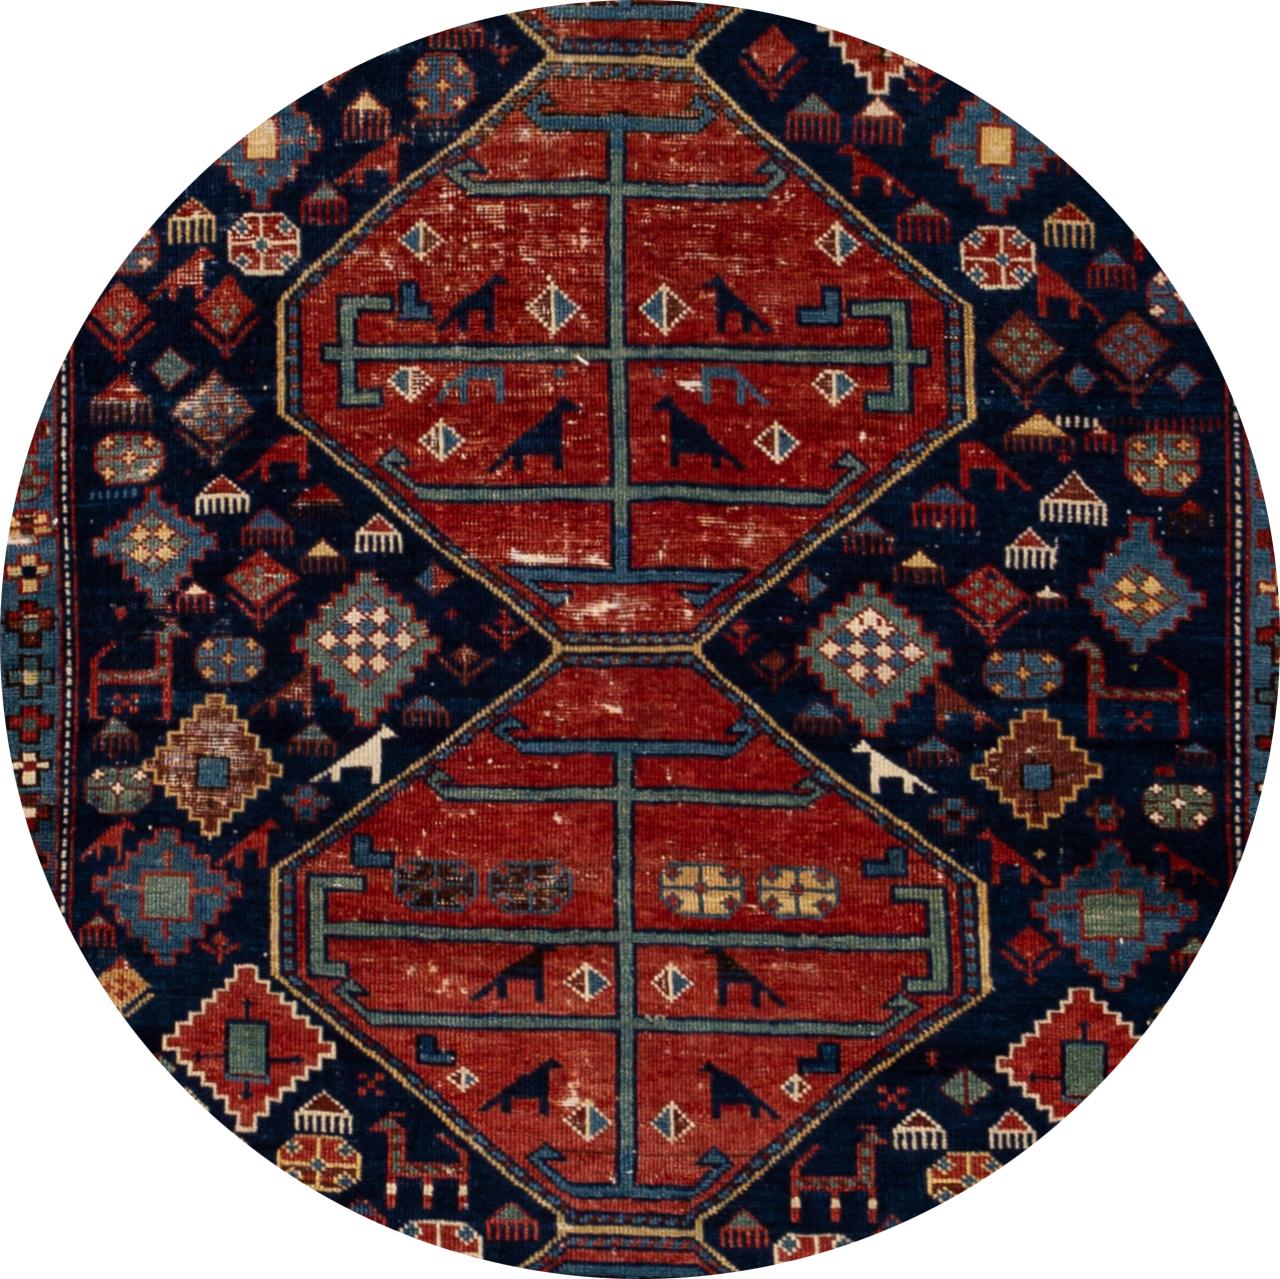 Antique beautiful Scatter Caucasian rug, hand knotted wool with a navy blue field, red and multi-color accents in all-over multi medallion design.
This rug measures 3'9